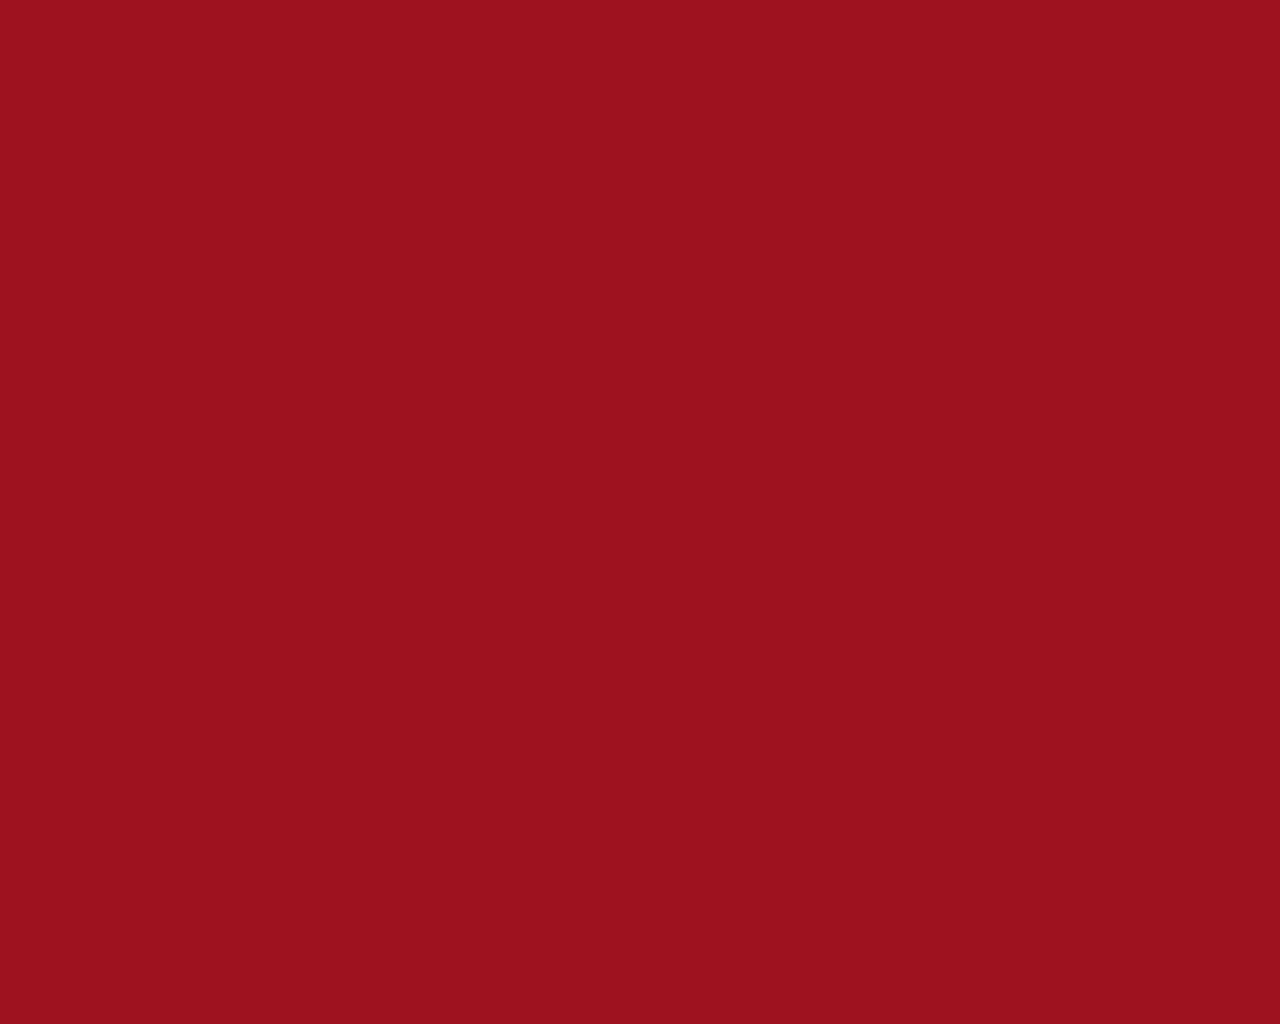 1280x1024 Ruby Red Solid Color Background